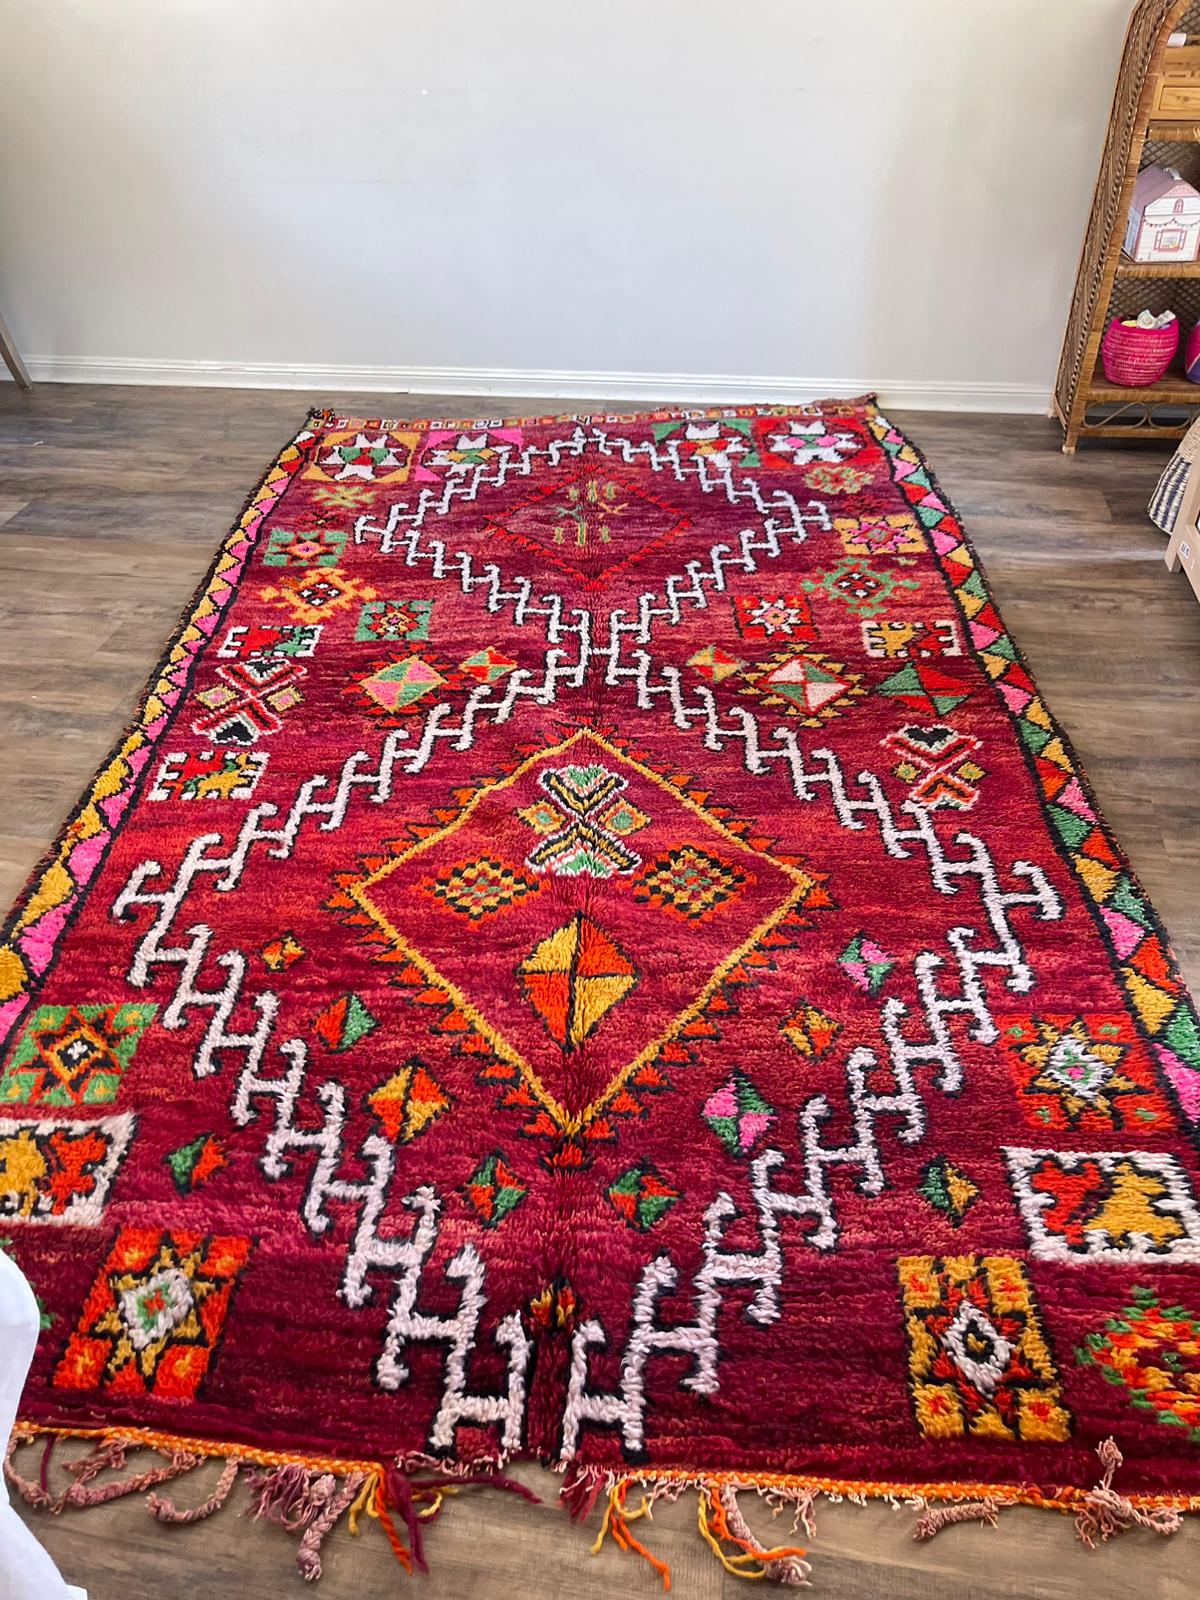 Red/purple vintage Moroccan Boujaad rug with orange, yellow, pink, red and green accents